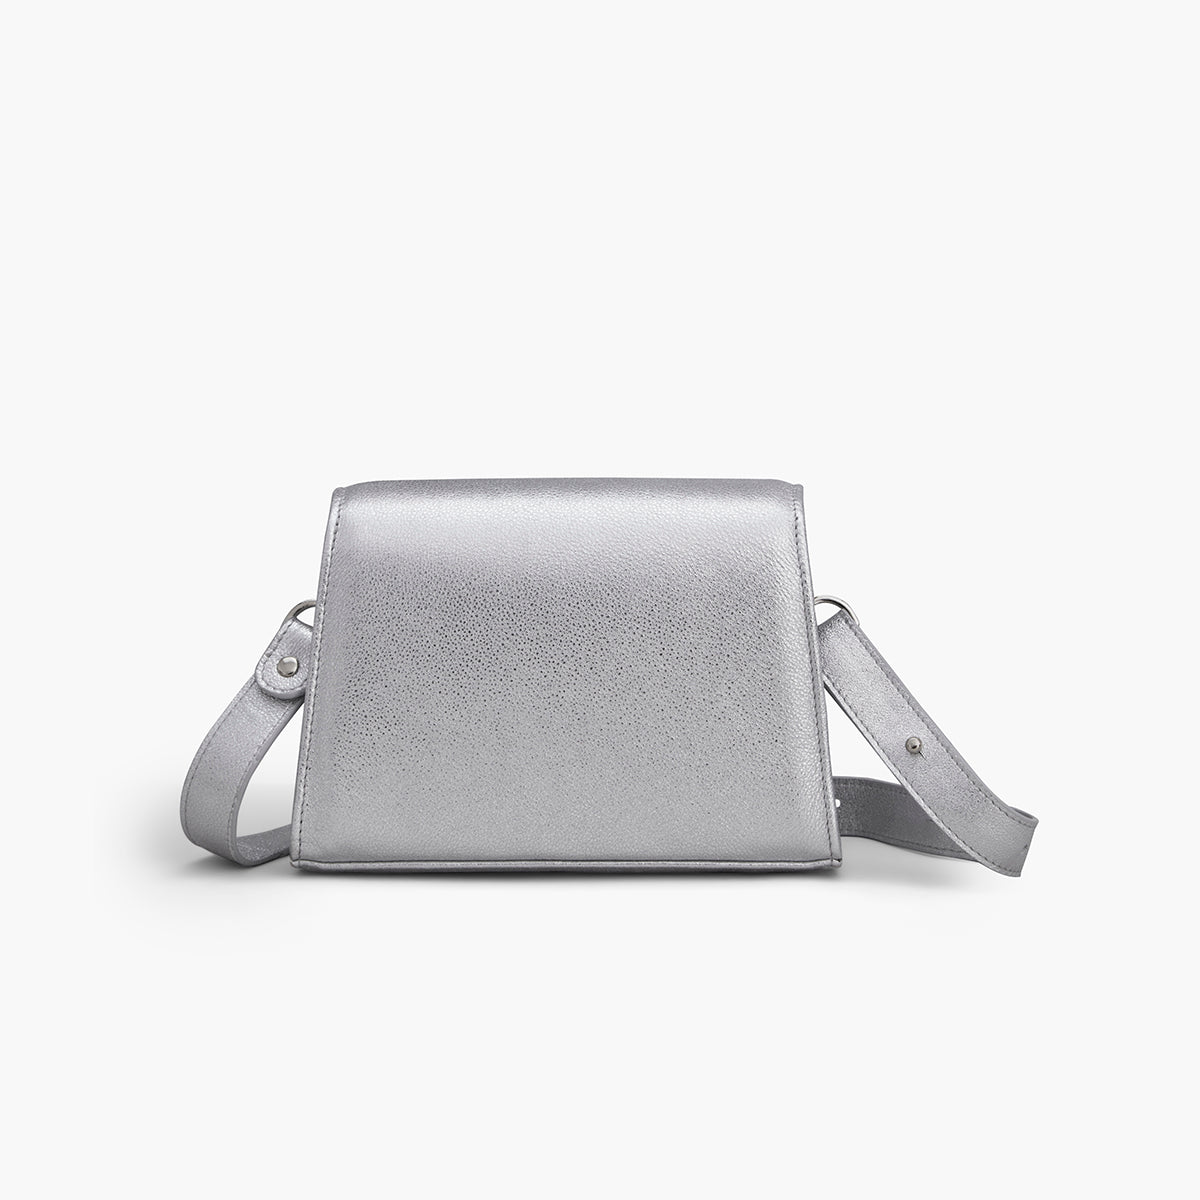 Shows the backside of a silver shimmer grained leather handbag with silver metalware and an adjustable strap for a comfortable crossbody or shoulder fit. 